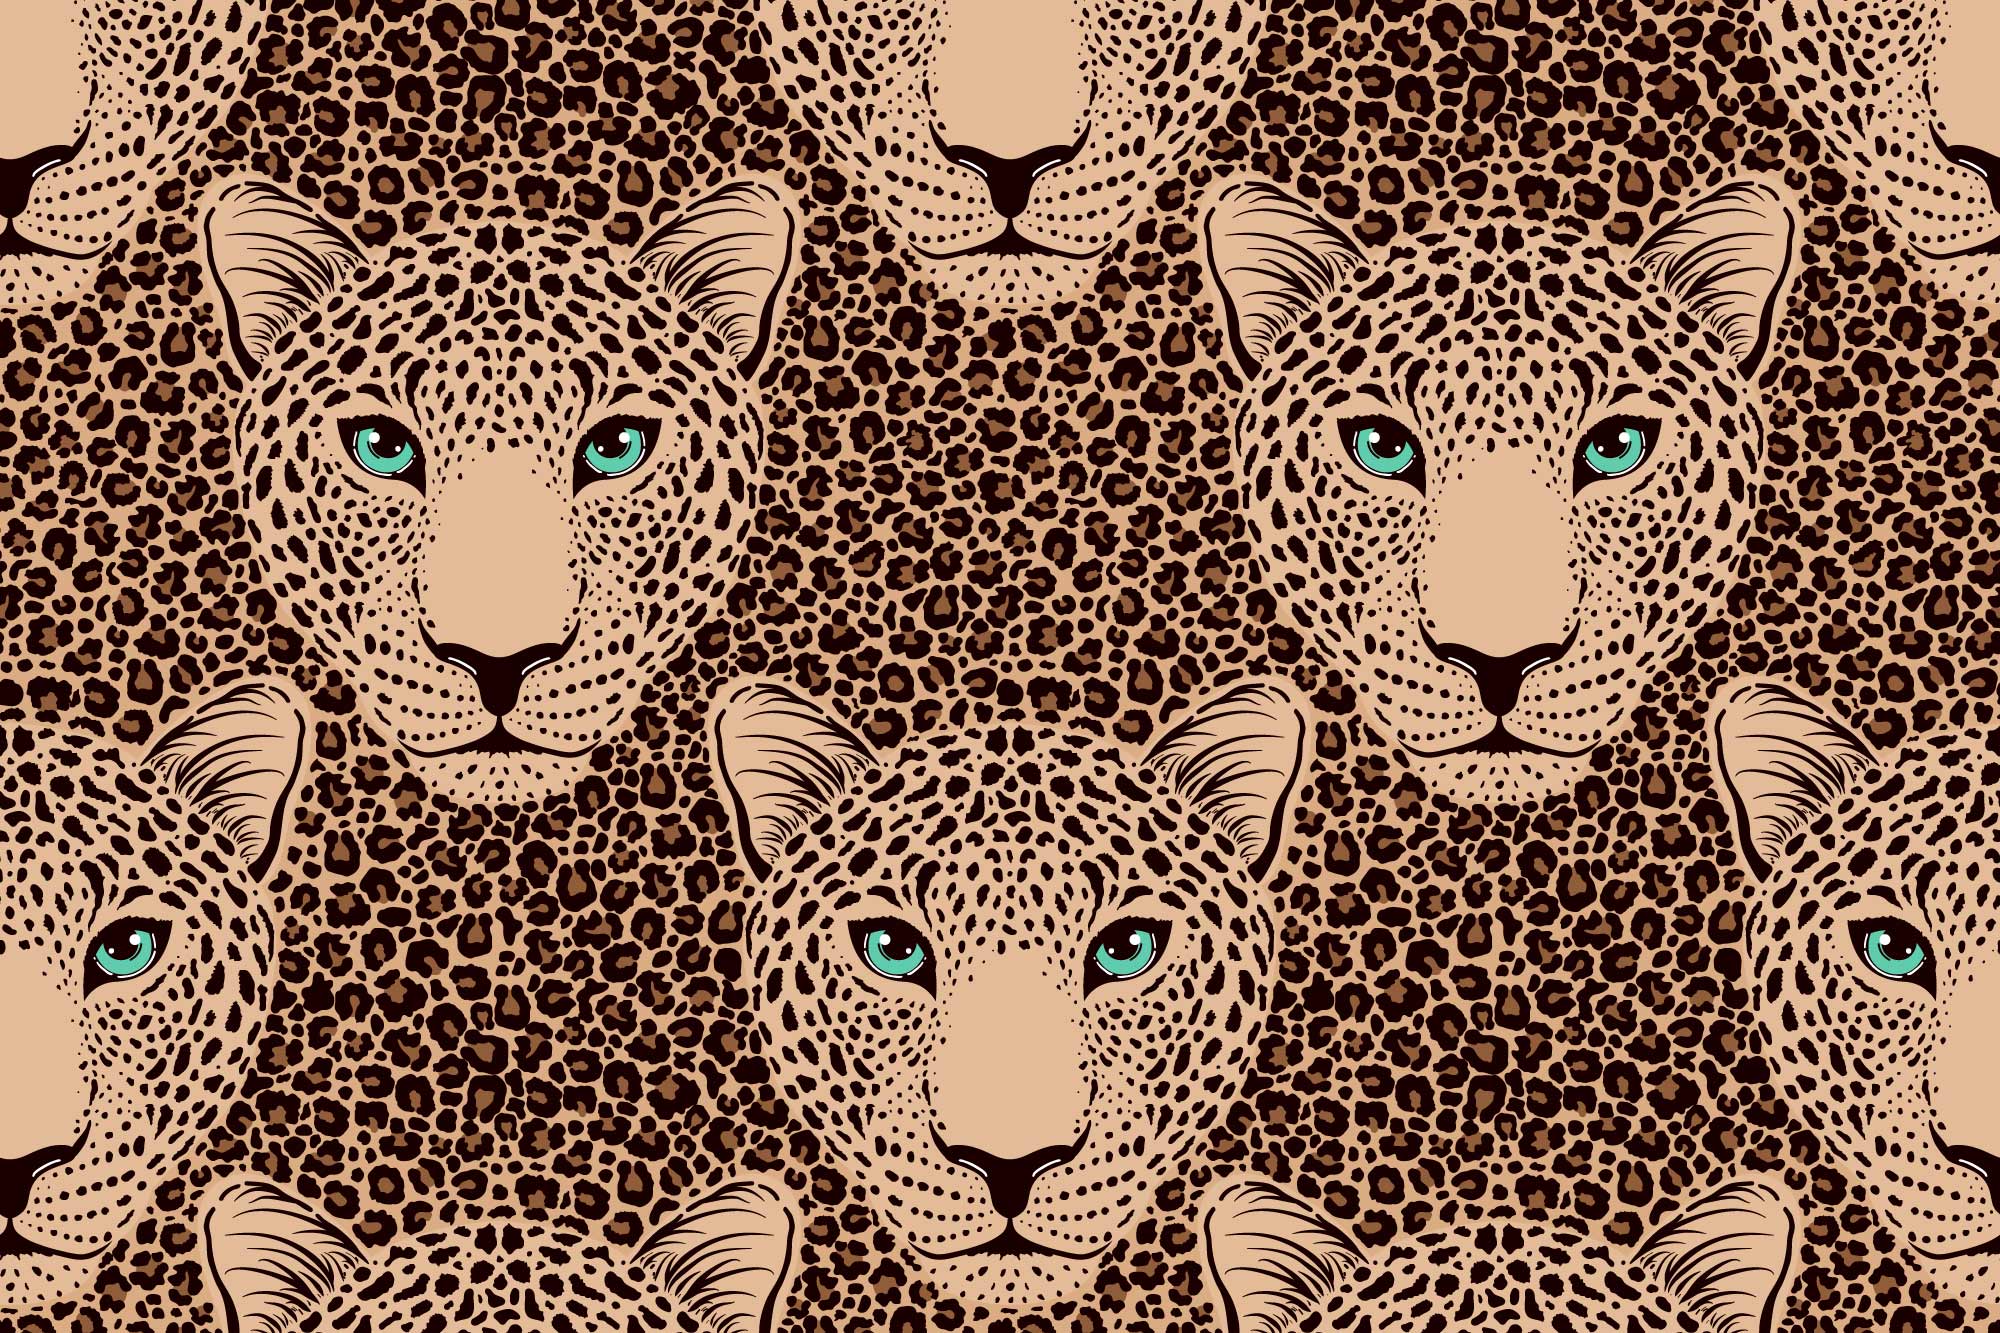 Leopard pattern with blue eyes on a brown background.